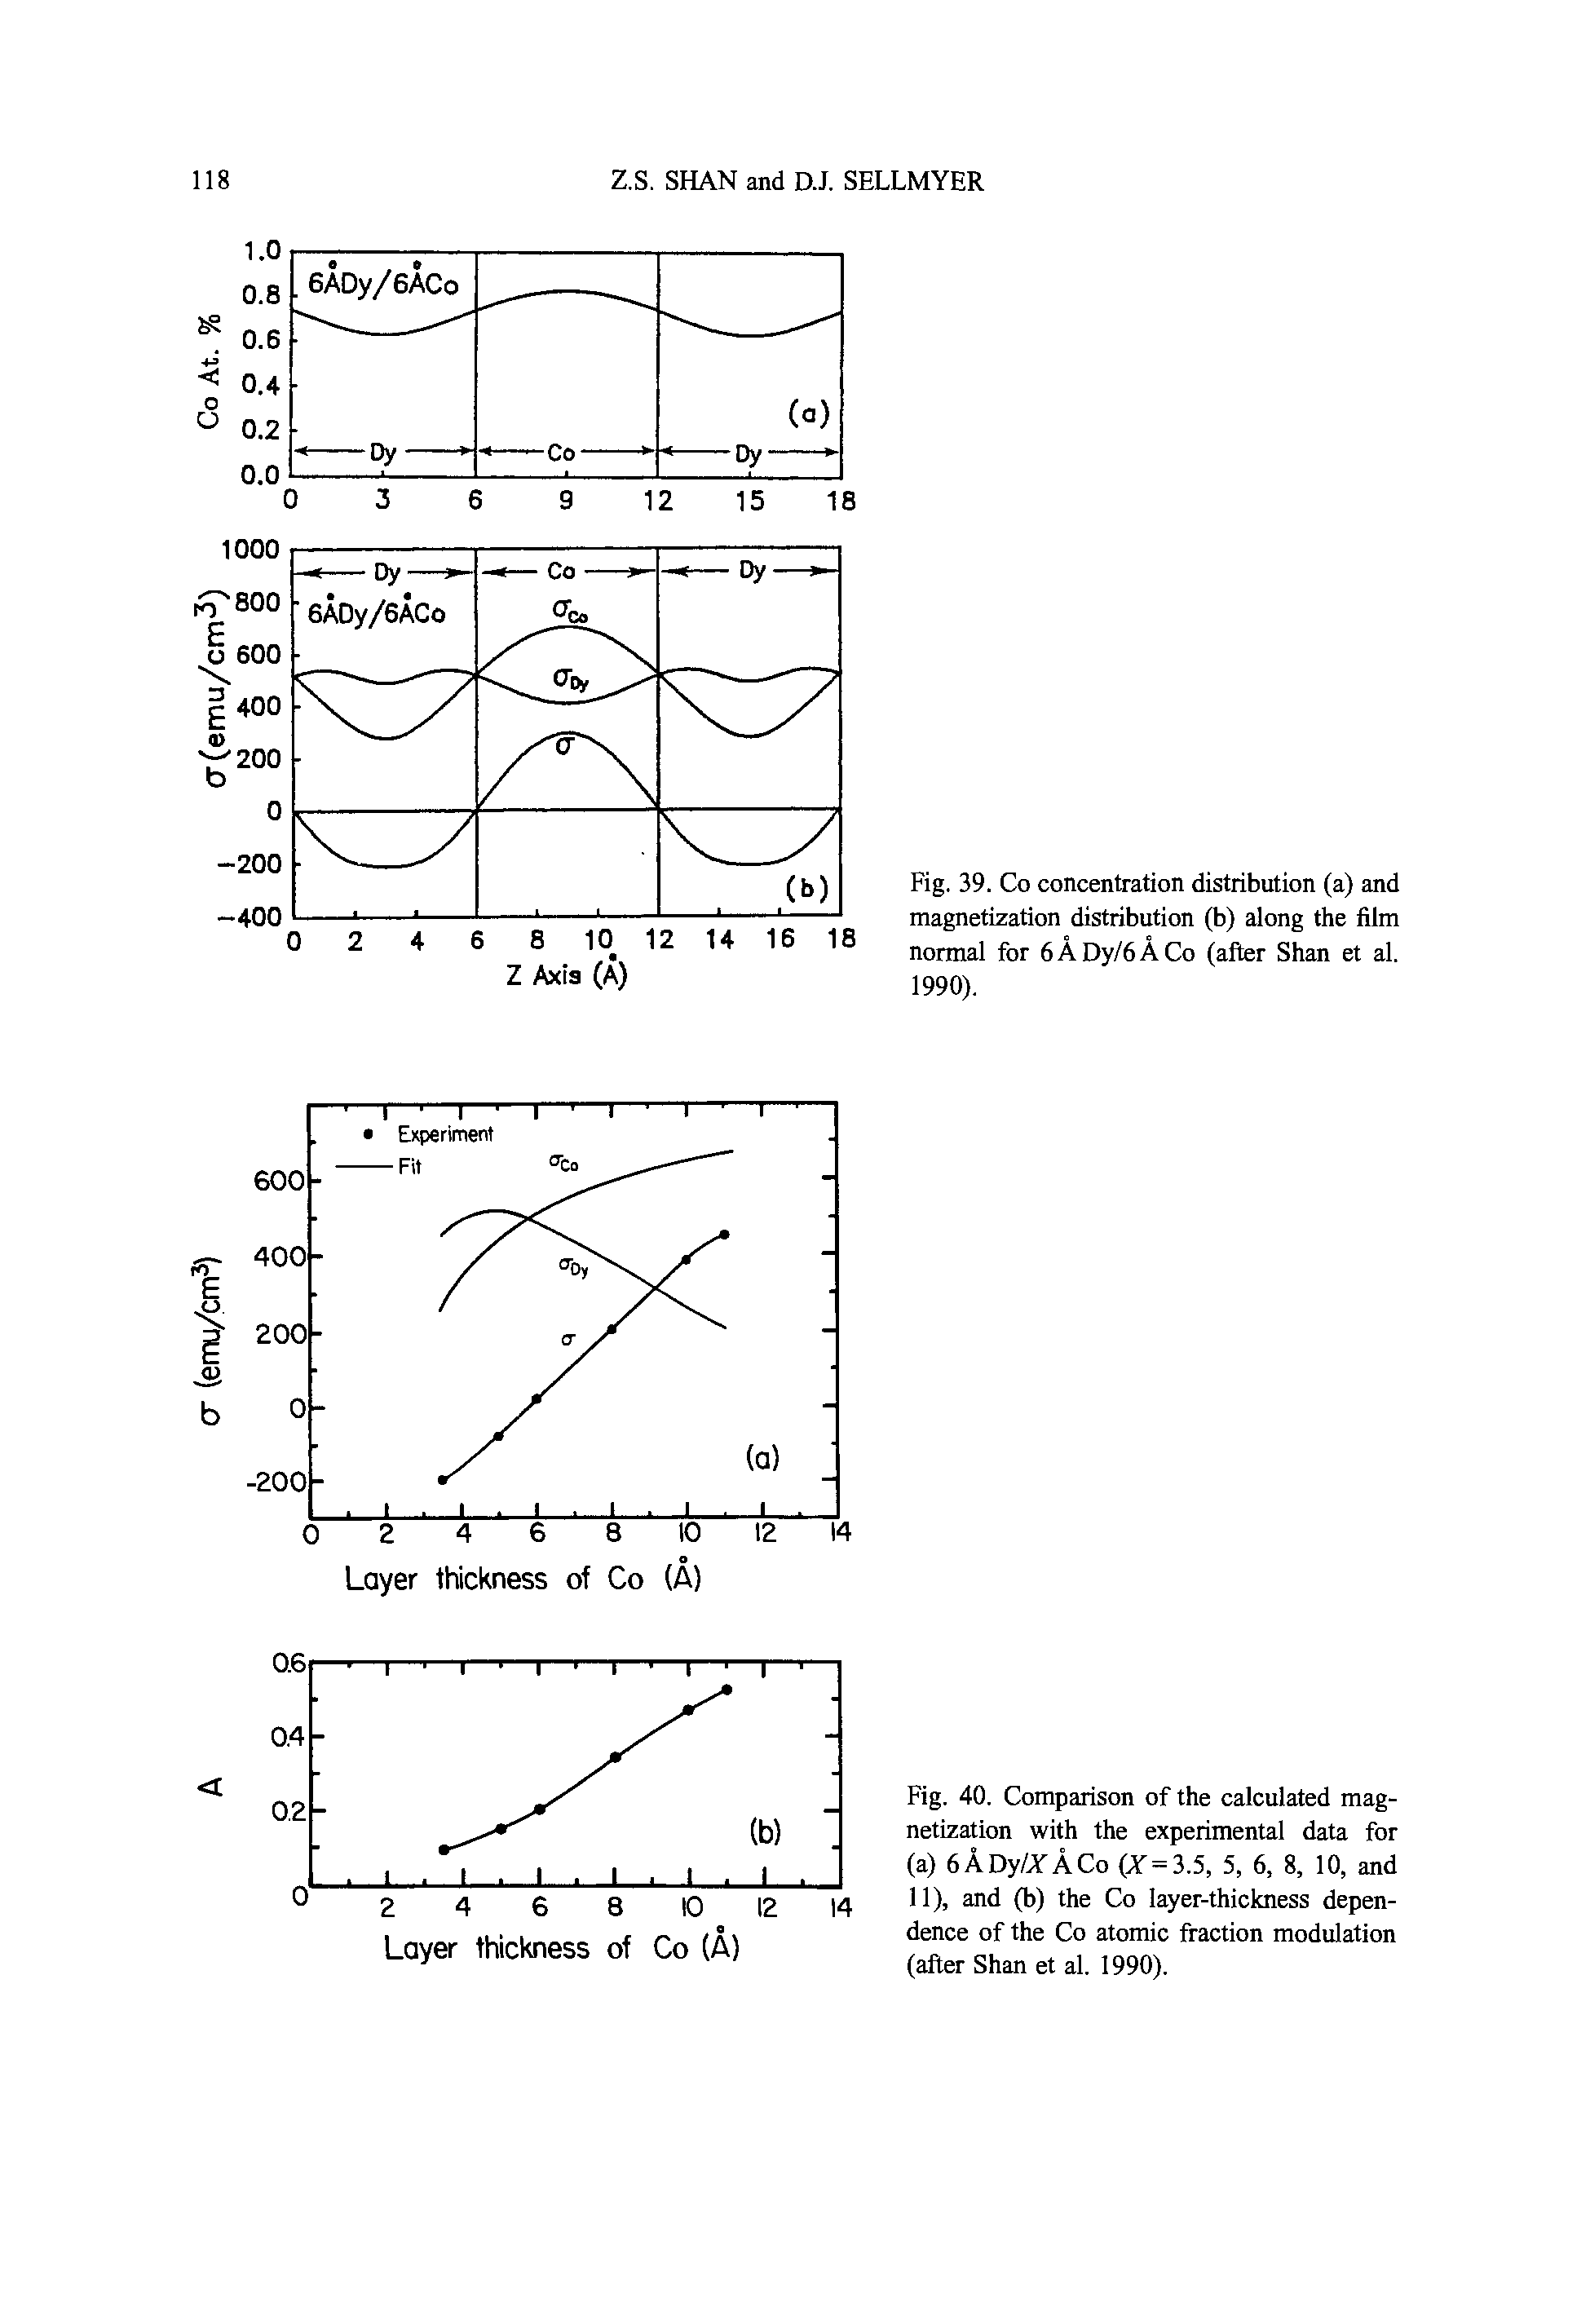 Fig. 40. Comparison of the calculated magnetization with the experimental data for (a) 6ADy/YACo (Y = 3.5, 5, 6, 8, 10, and 11), and (b) the Co layer-thickness dependence of the Co atomic fraction modulation (after Shan et al. 1990).